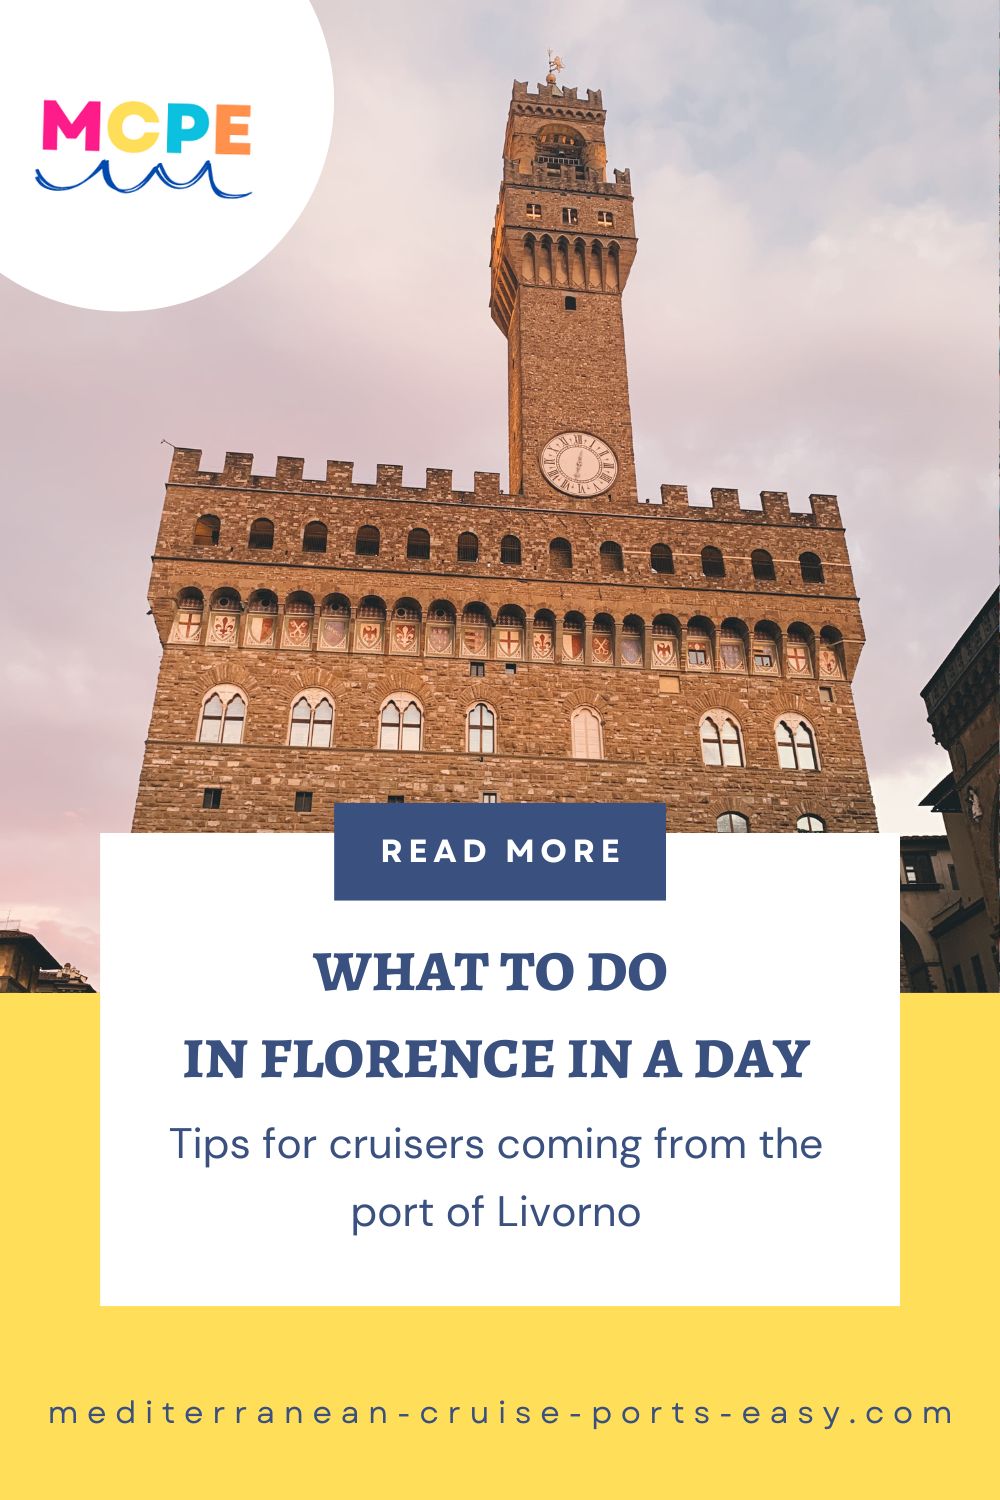 What to do in Florence in a day